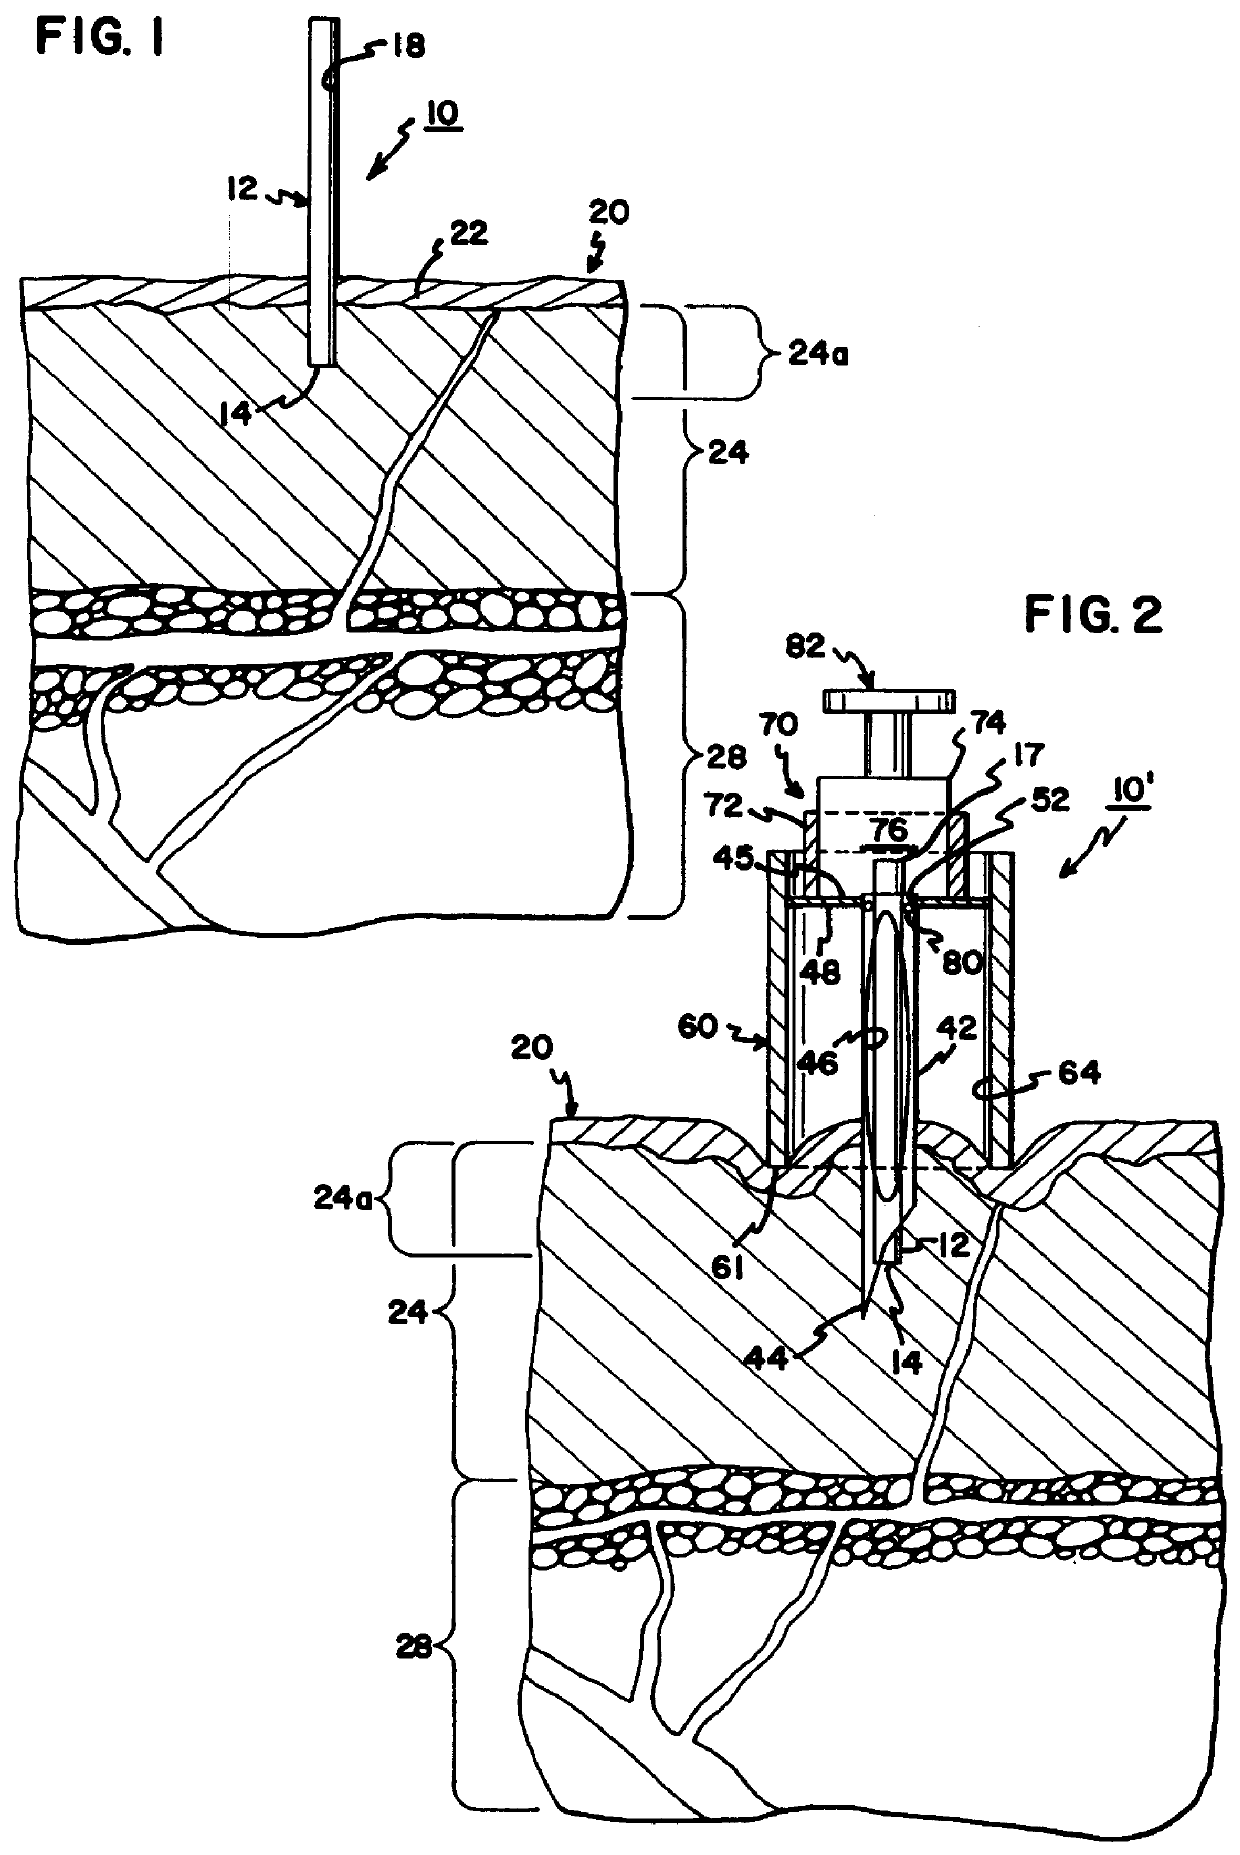 Interstitial fluid collection and constituent measurement